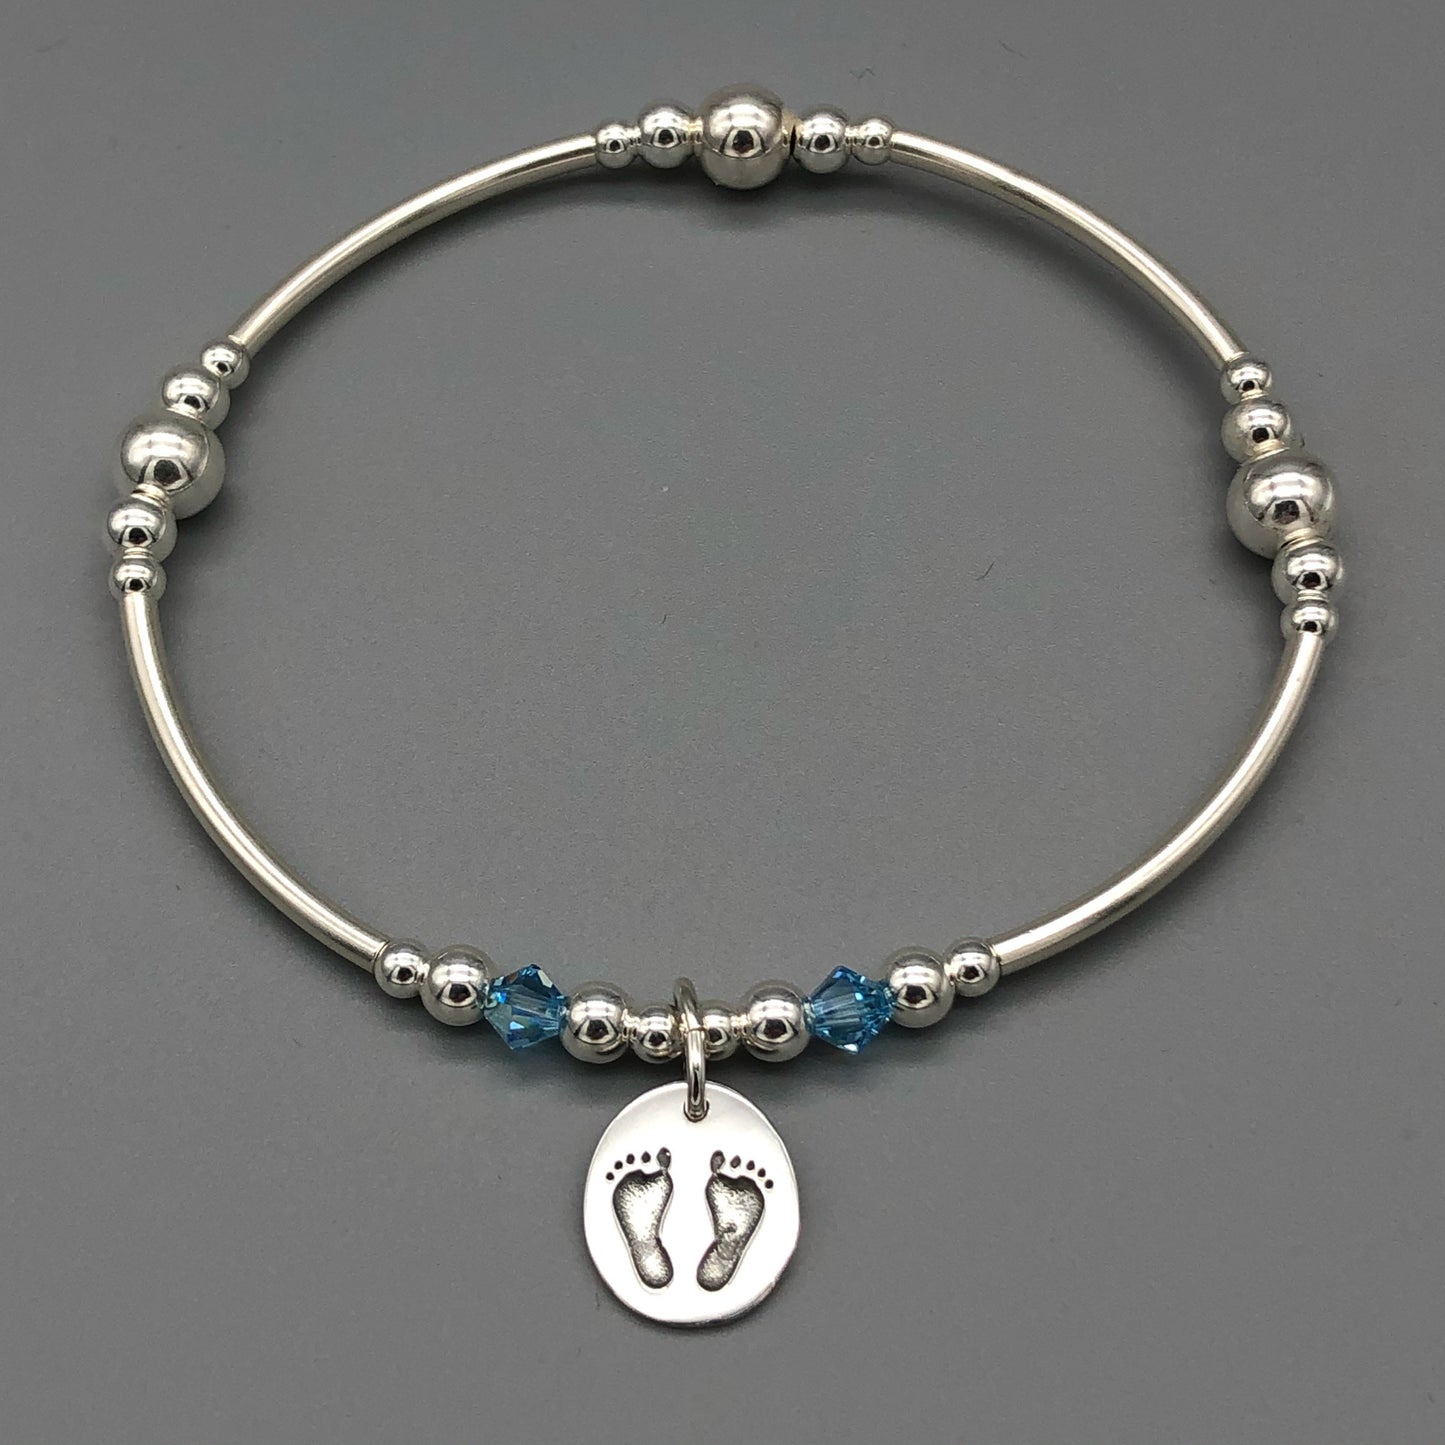 Baby Boy FootPrint charm sterling silver hand-made women's stacking bracelet